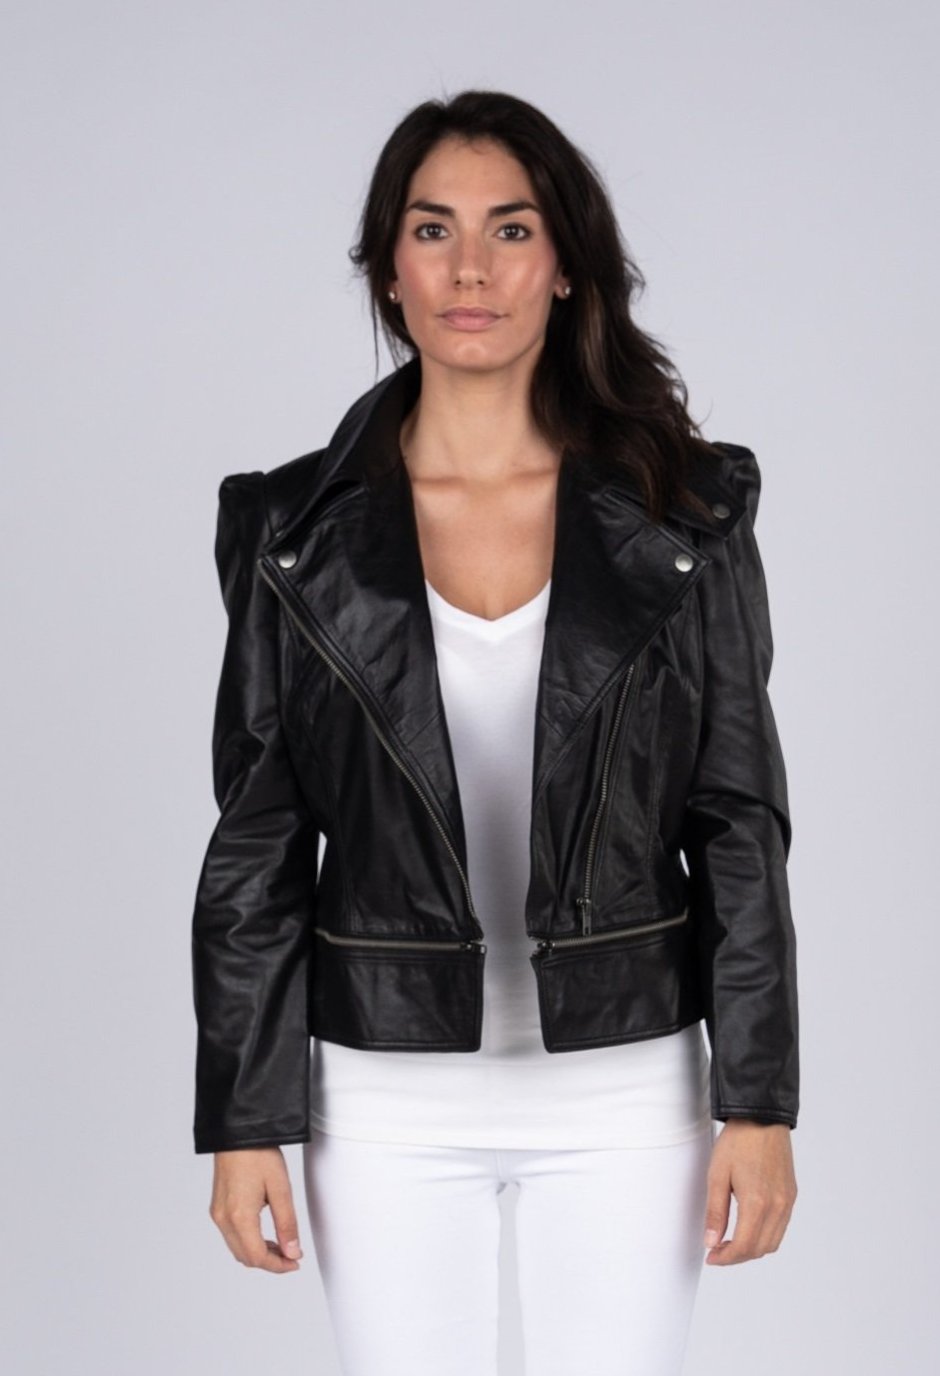 Annette Womens Leather Jacket - Discounted! Womens Leather Jacket FADCLOSET